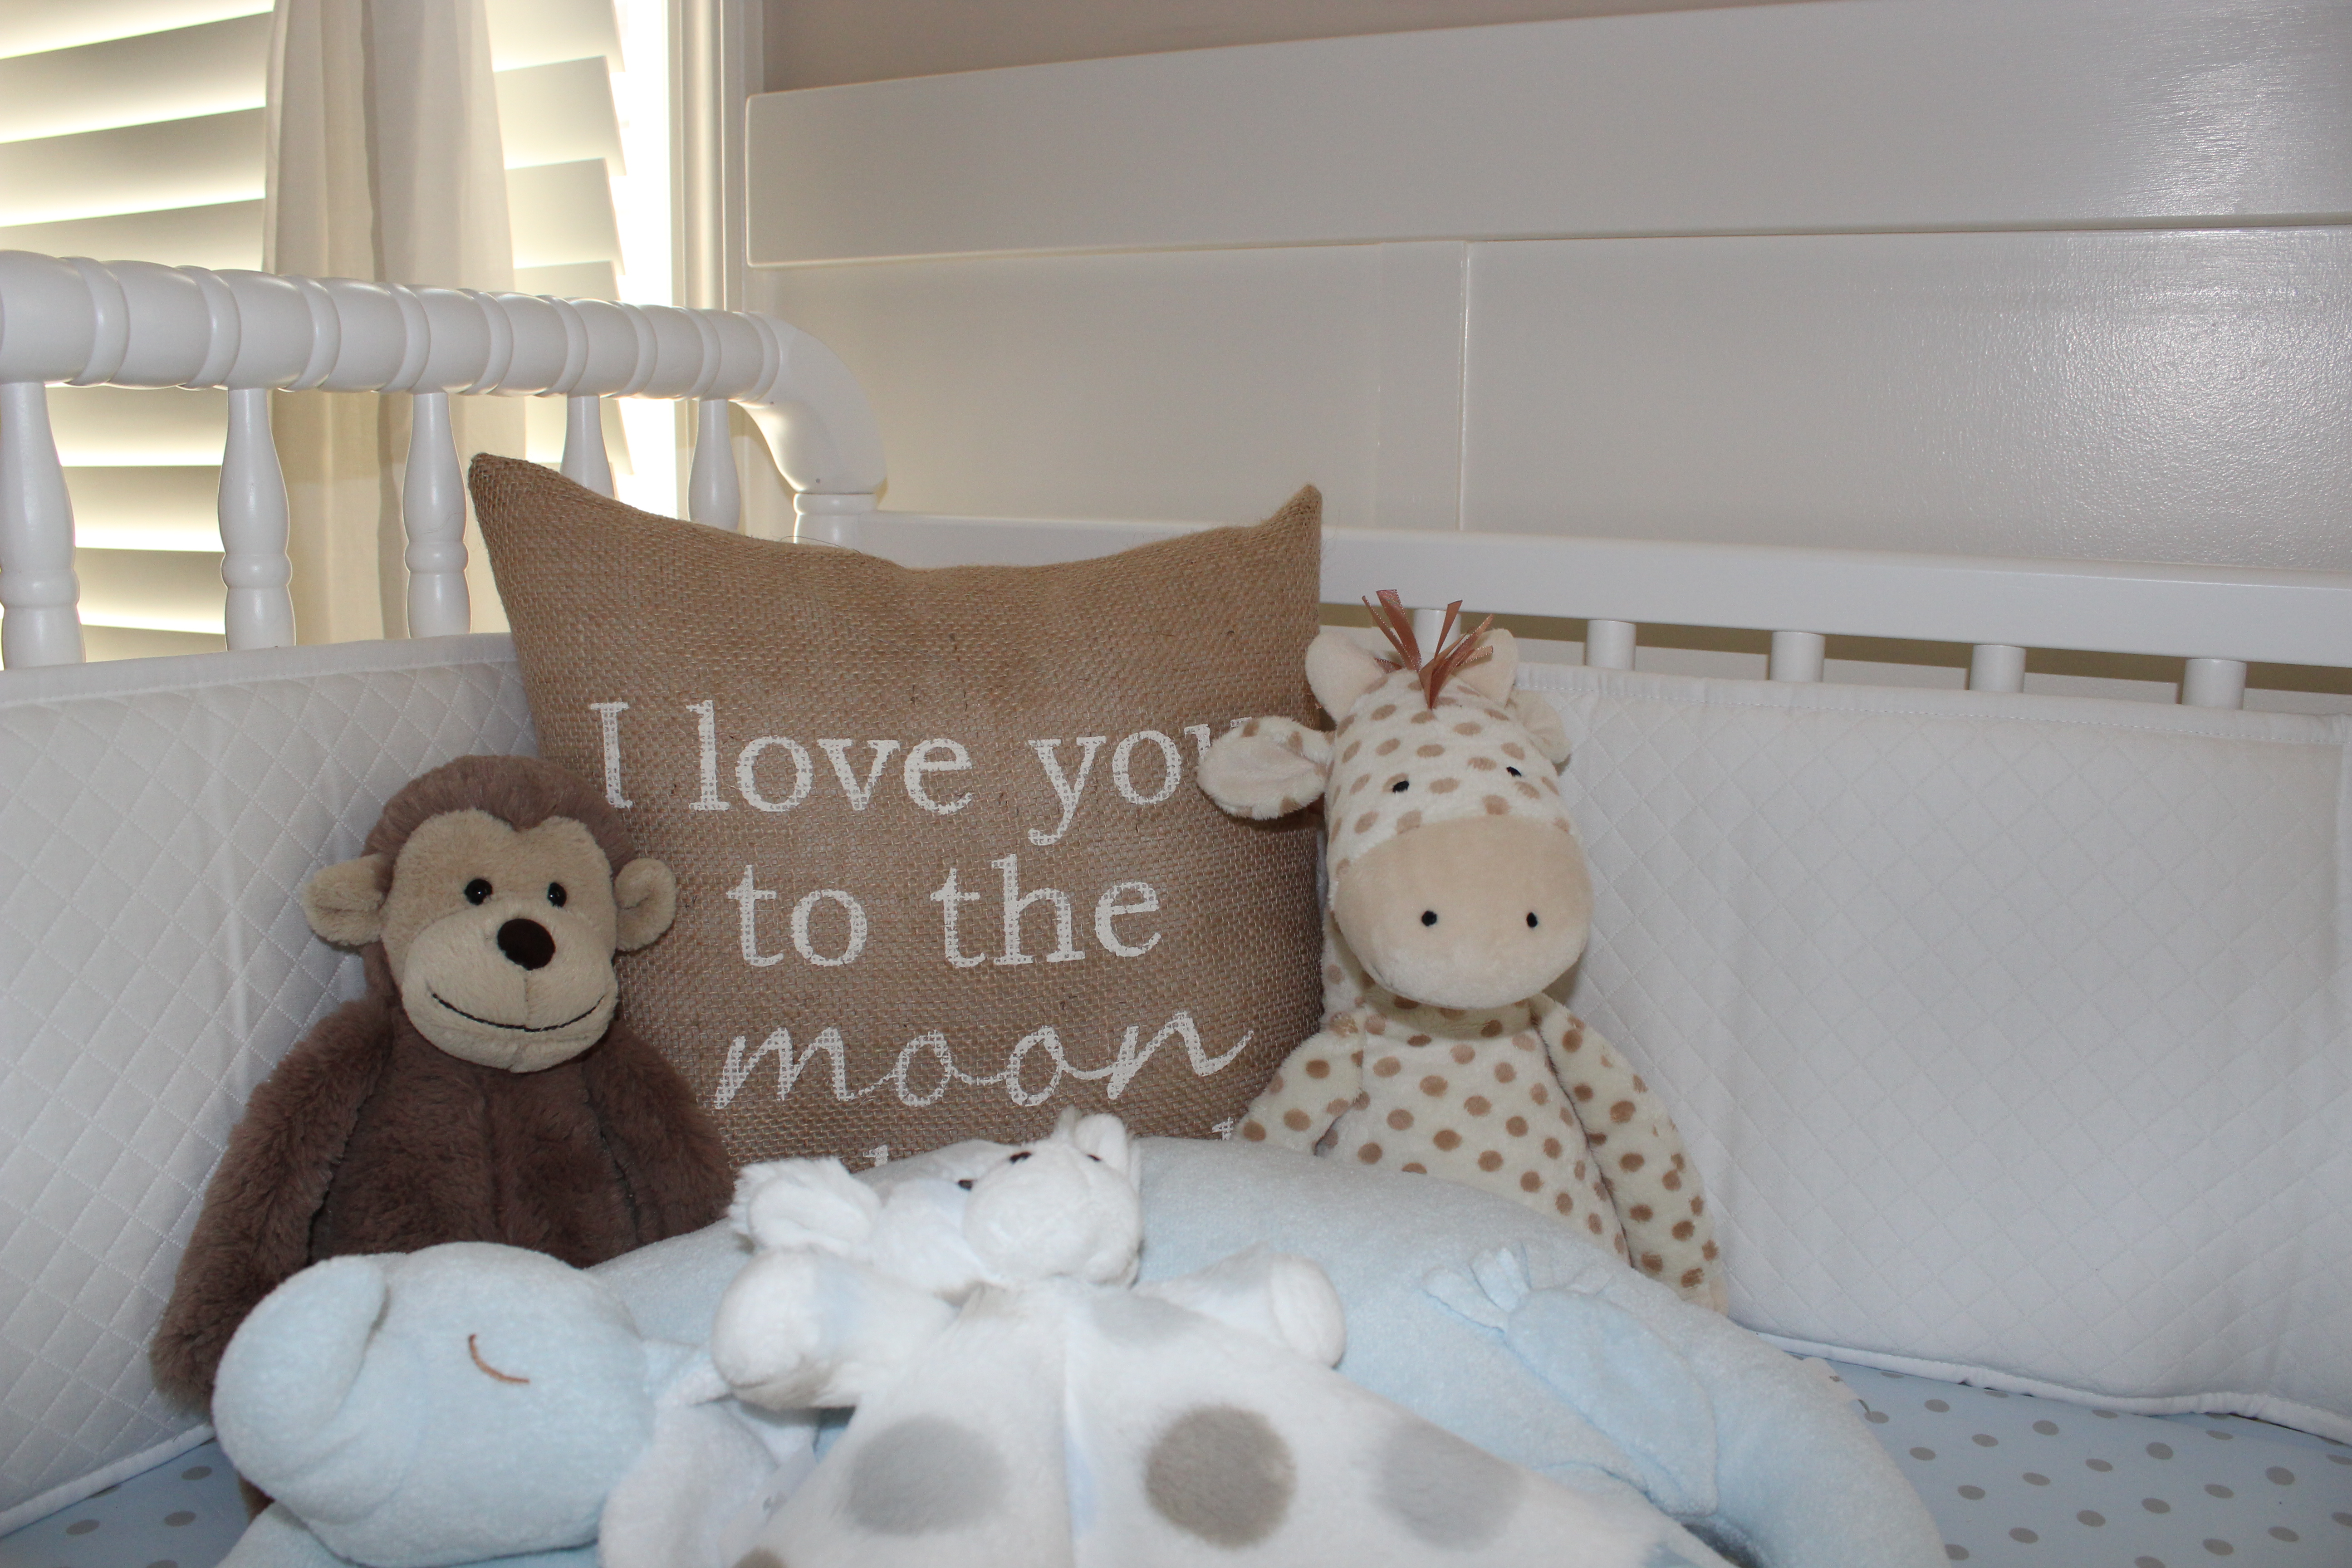 "I Love You to the Moon" Pillow for the Nursery